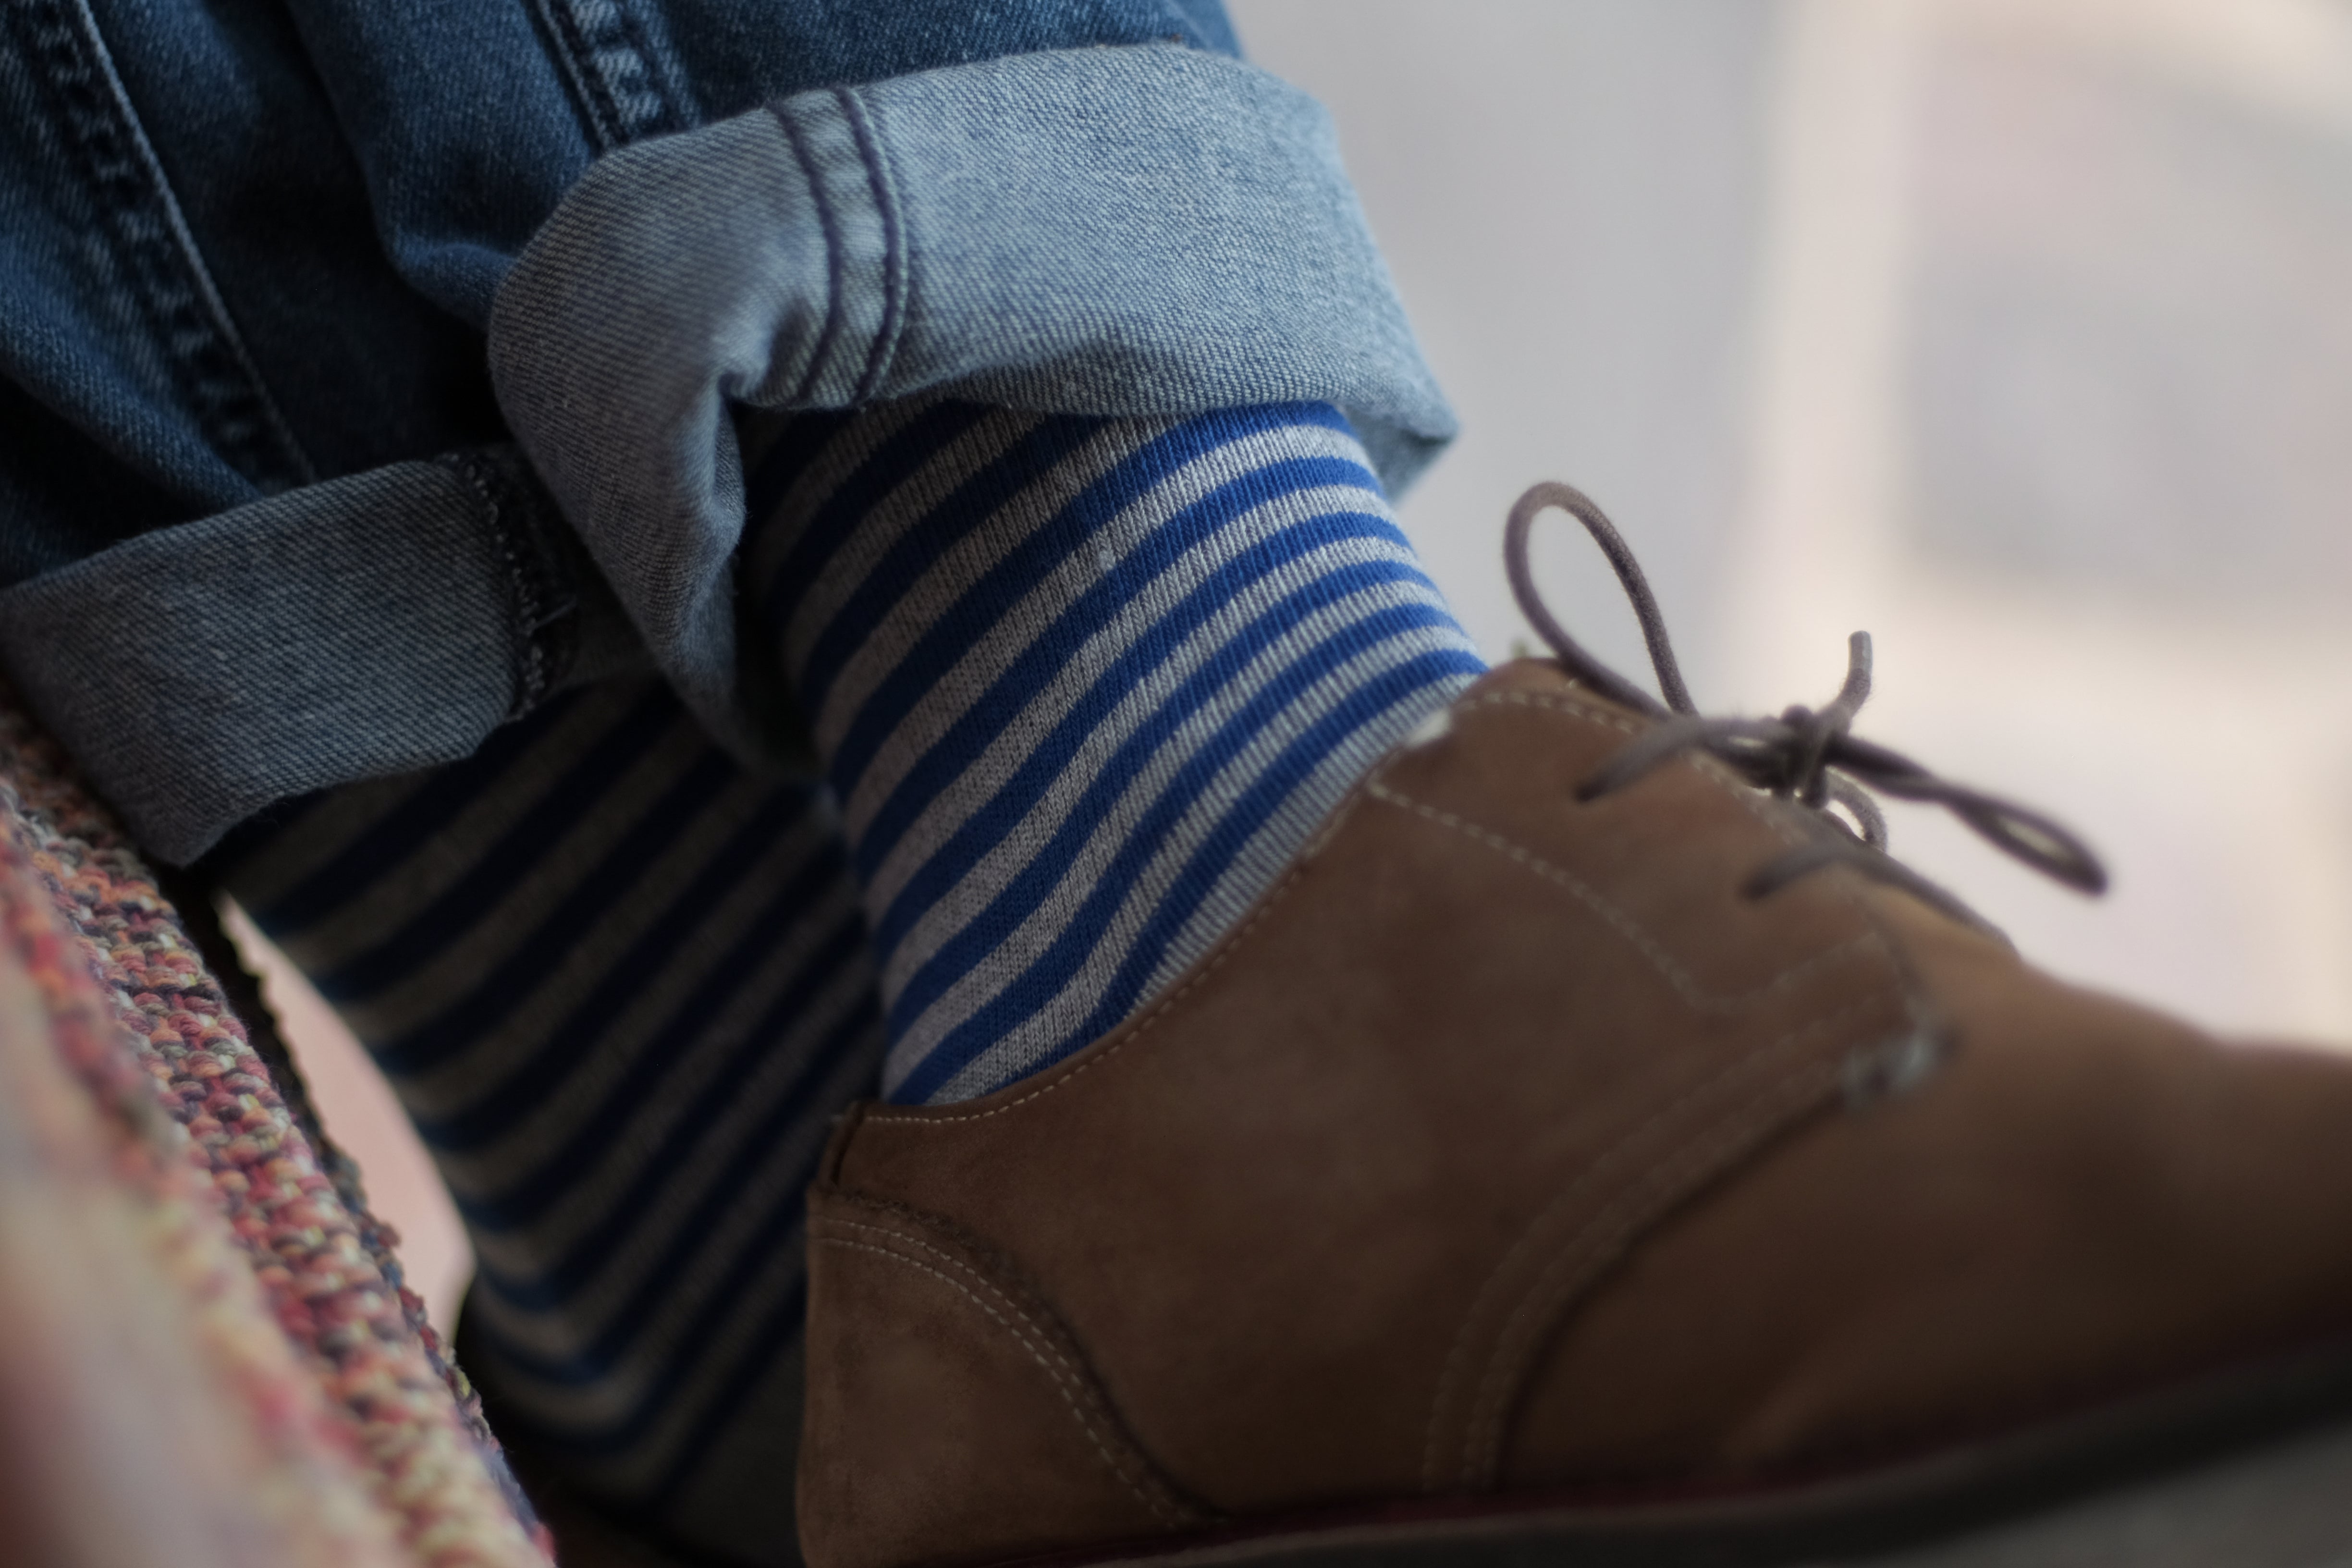 light grey and blue striped over the calf dress socks, leather brown dress shoes, blue jeans